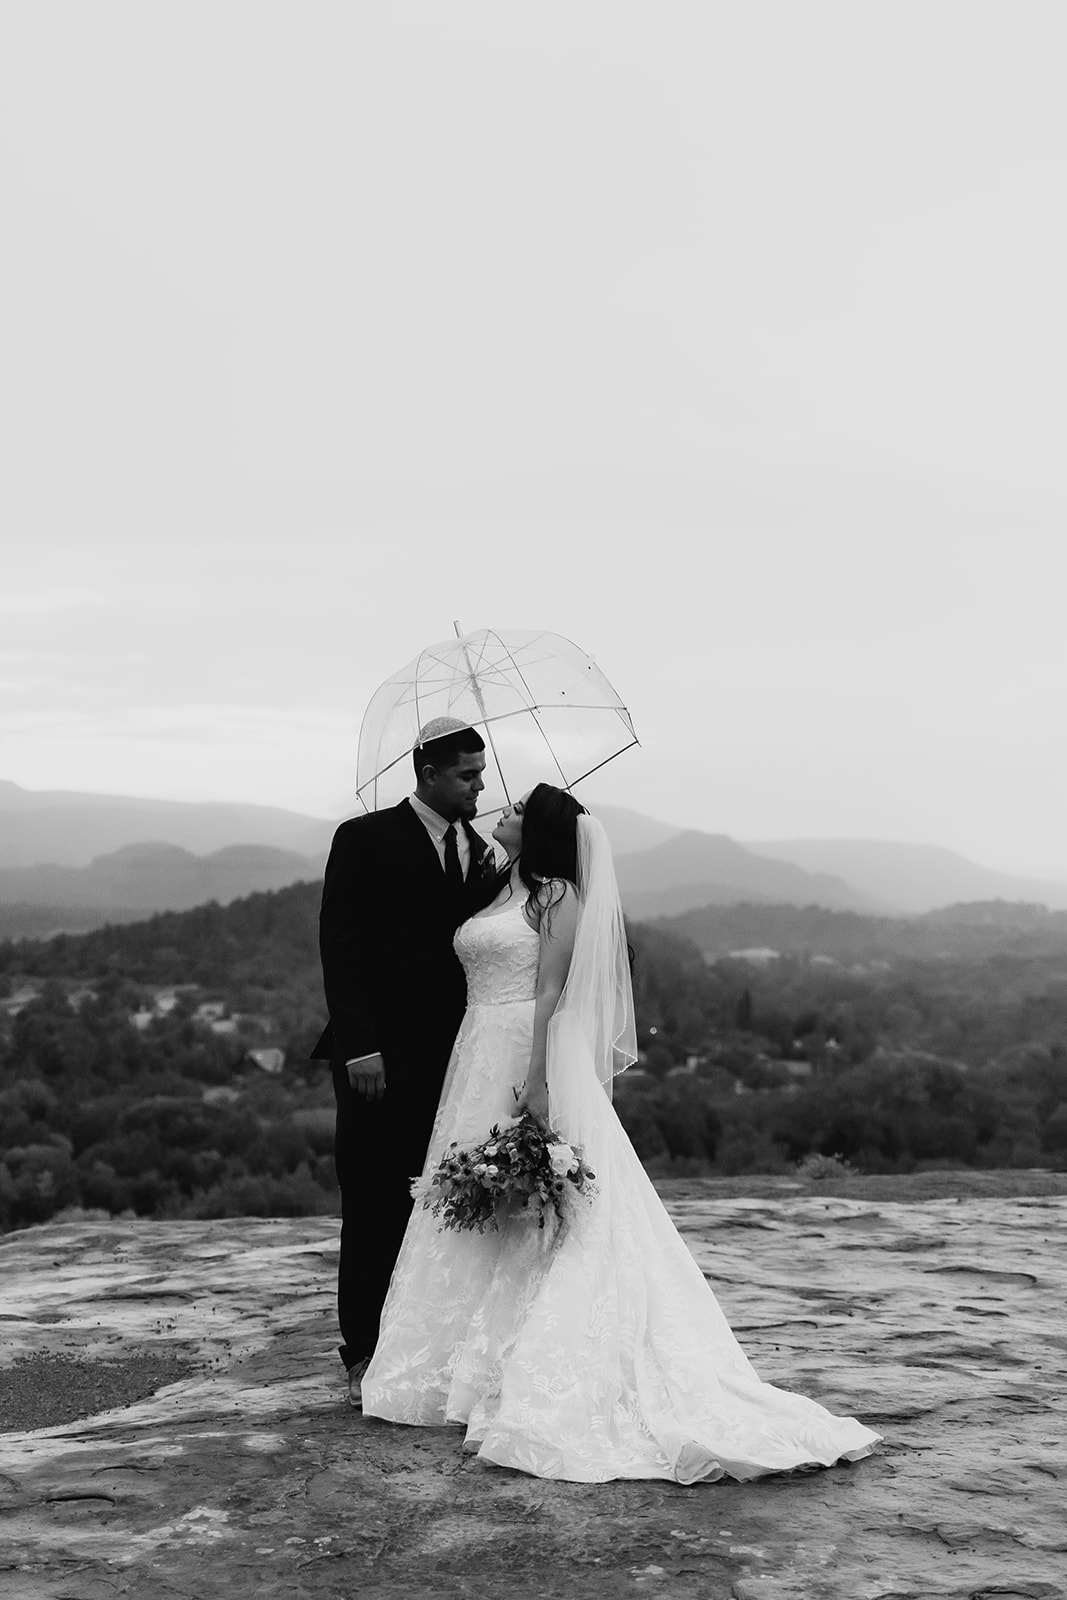 A couple who eloped in sedona kiss in the rain under an umbrella